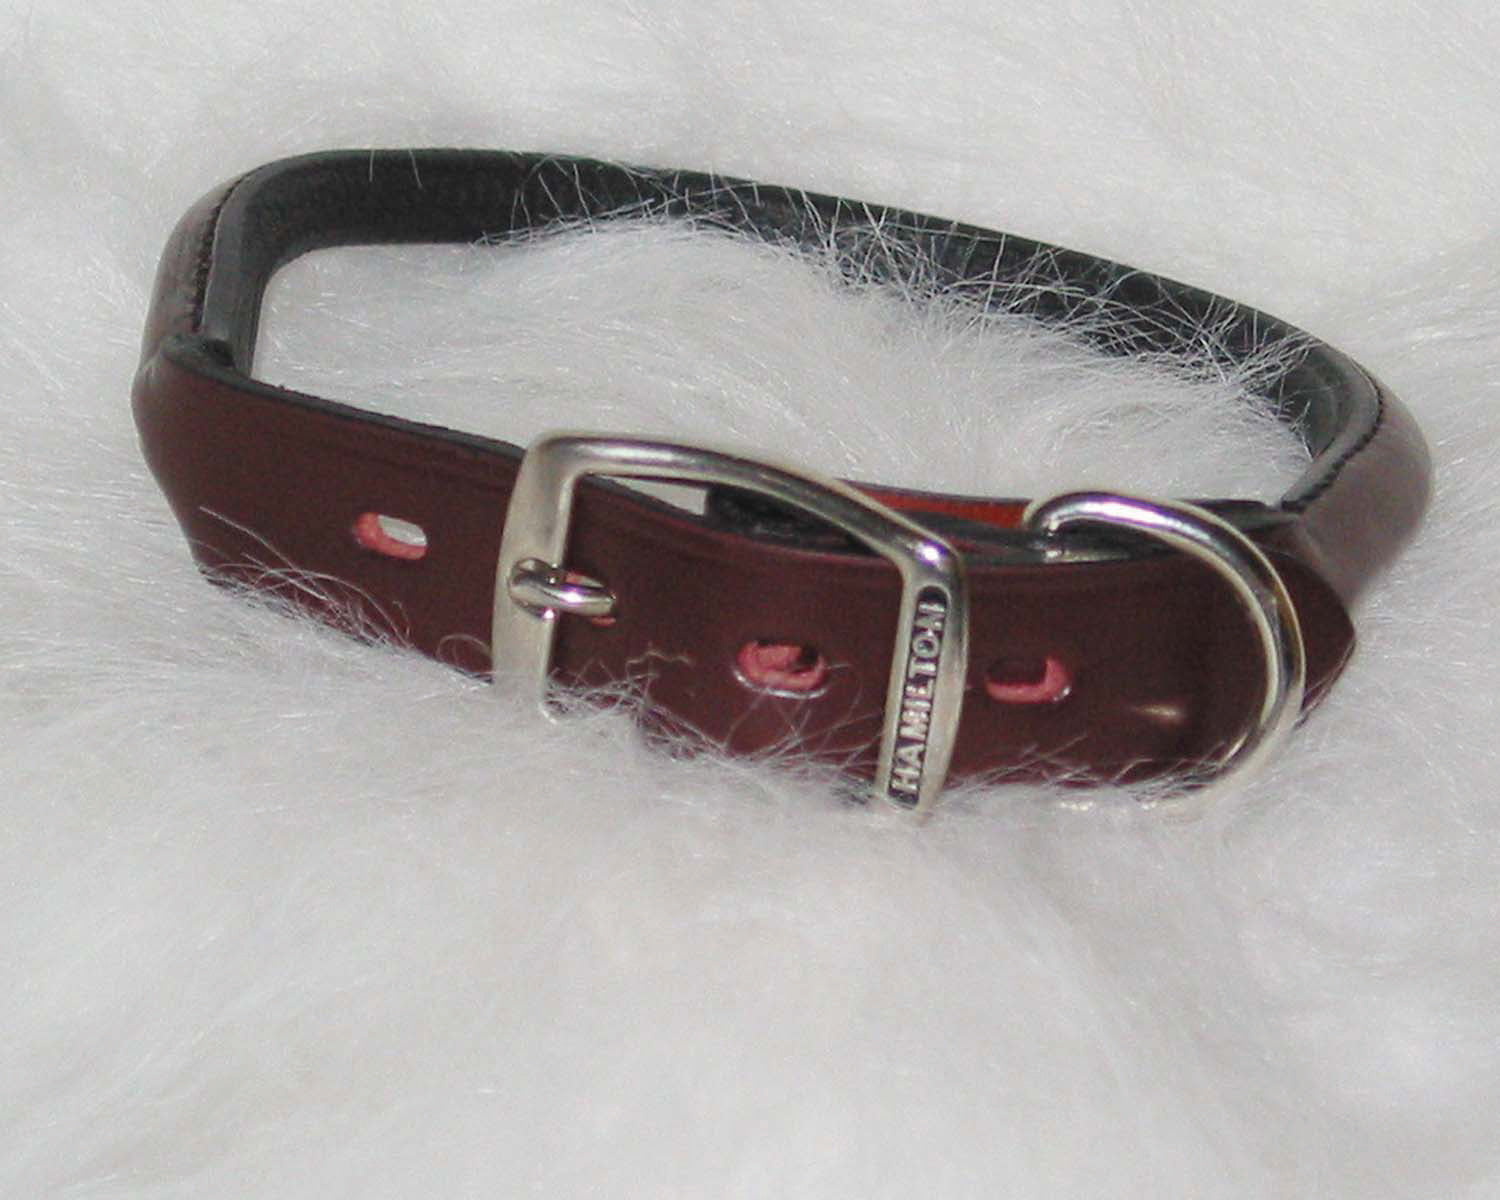 Hamilton Leather - Rolled Leather Collar